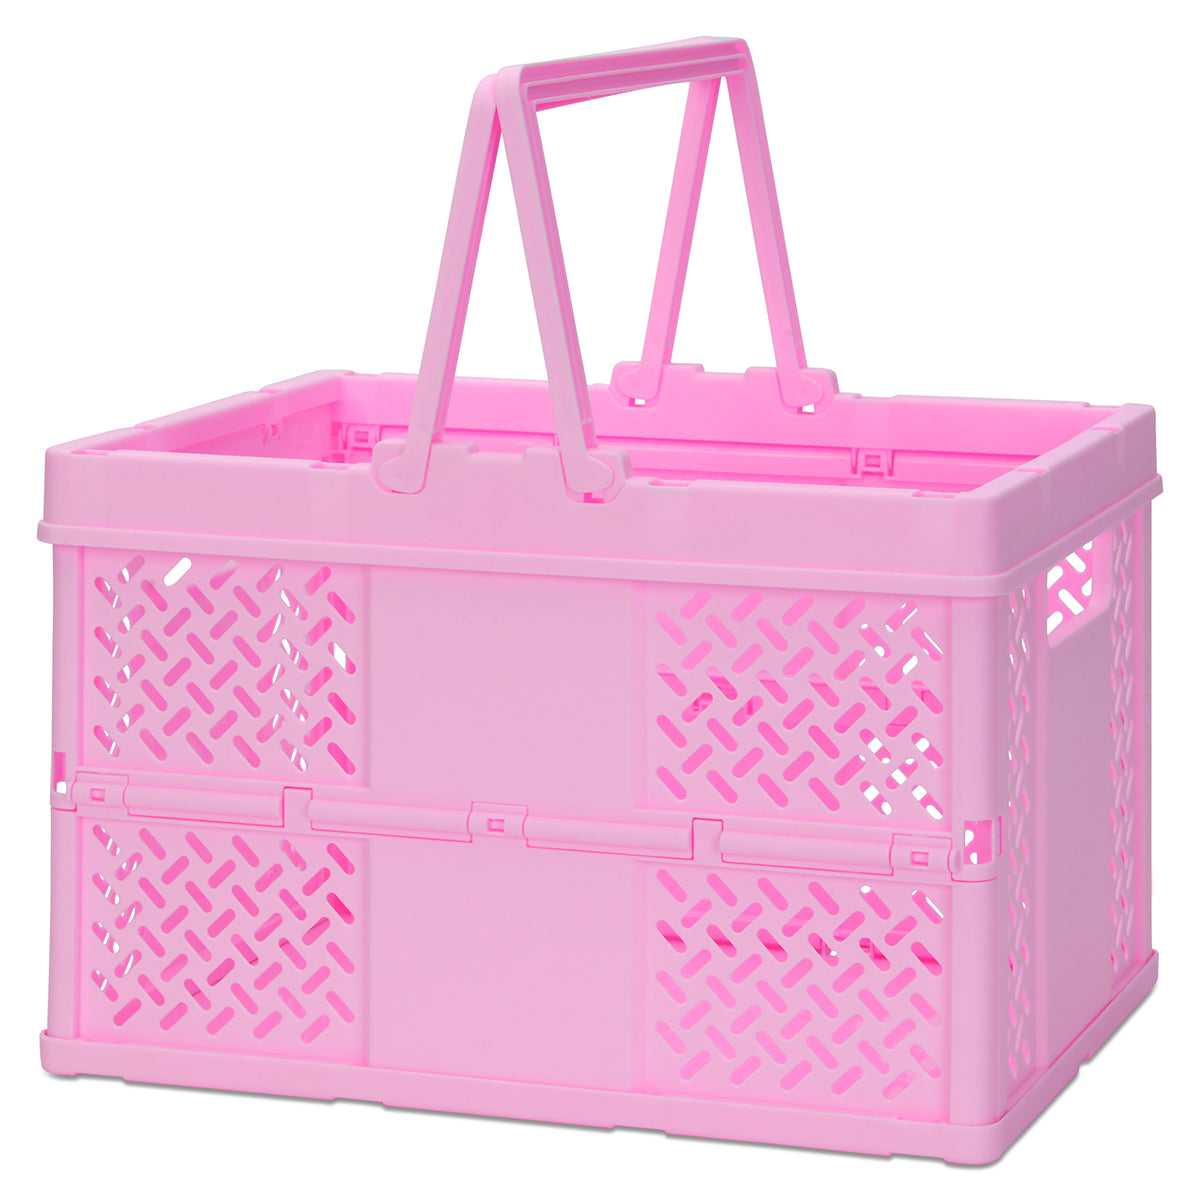 Large Foldable Storage Crate - Color Options